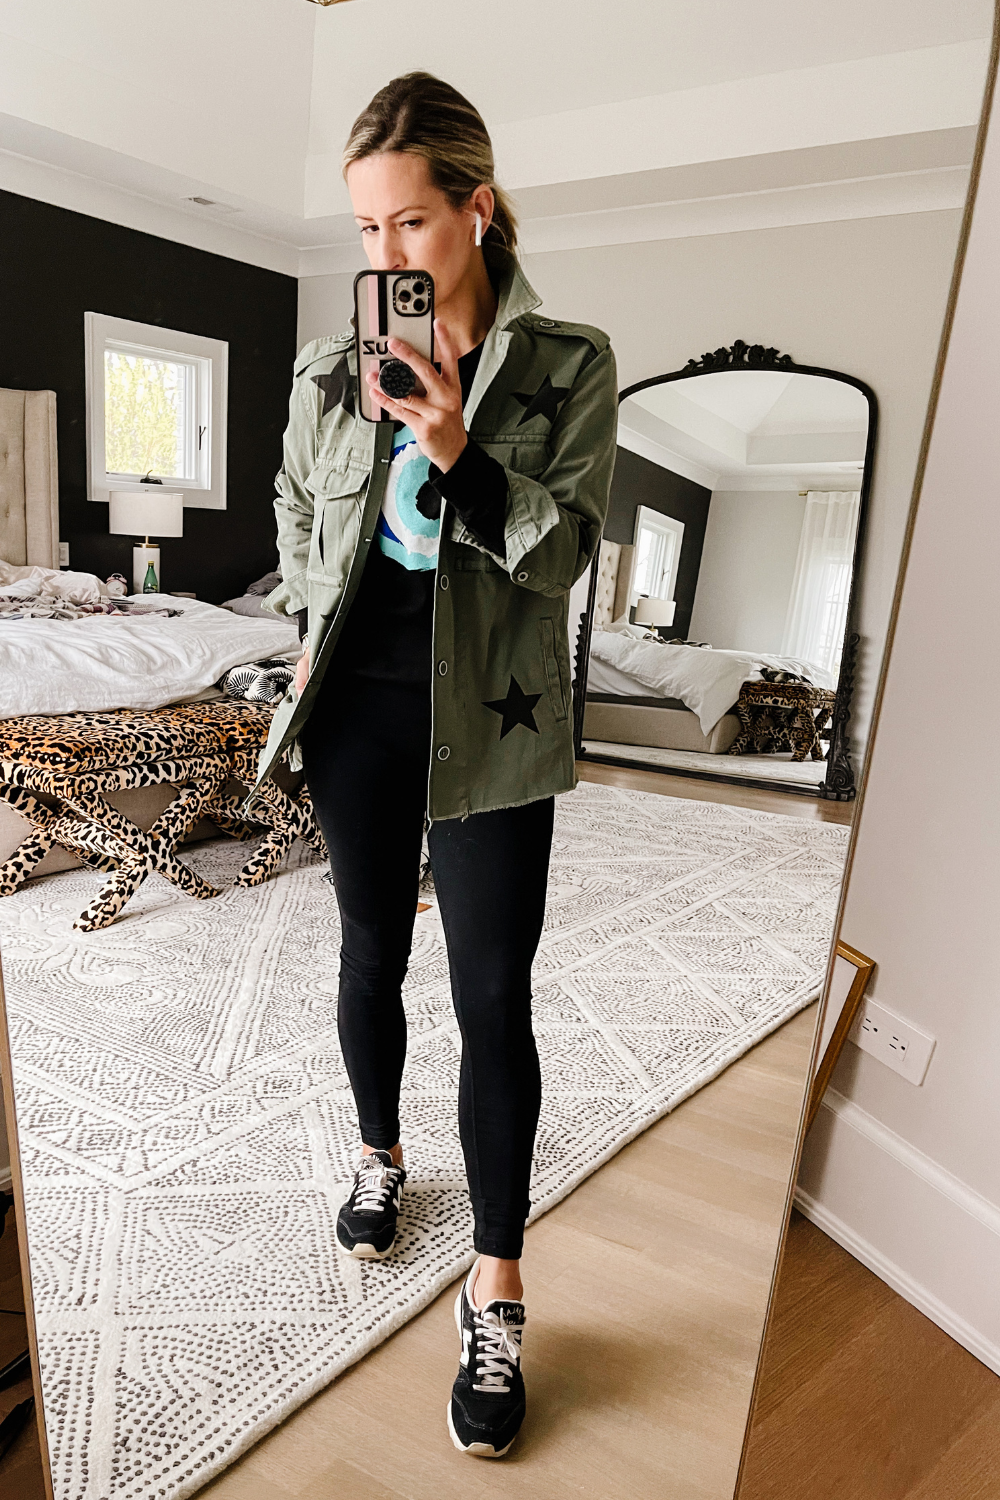 Suzanne wearing a graphic tee, leggings, sneakers, and a star print jacket